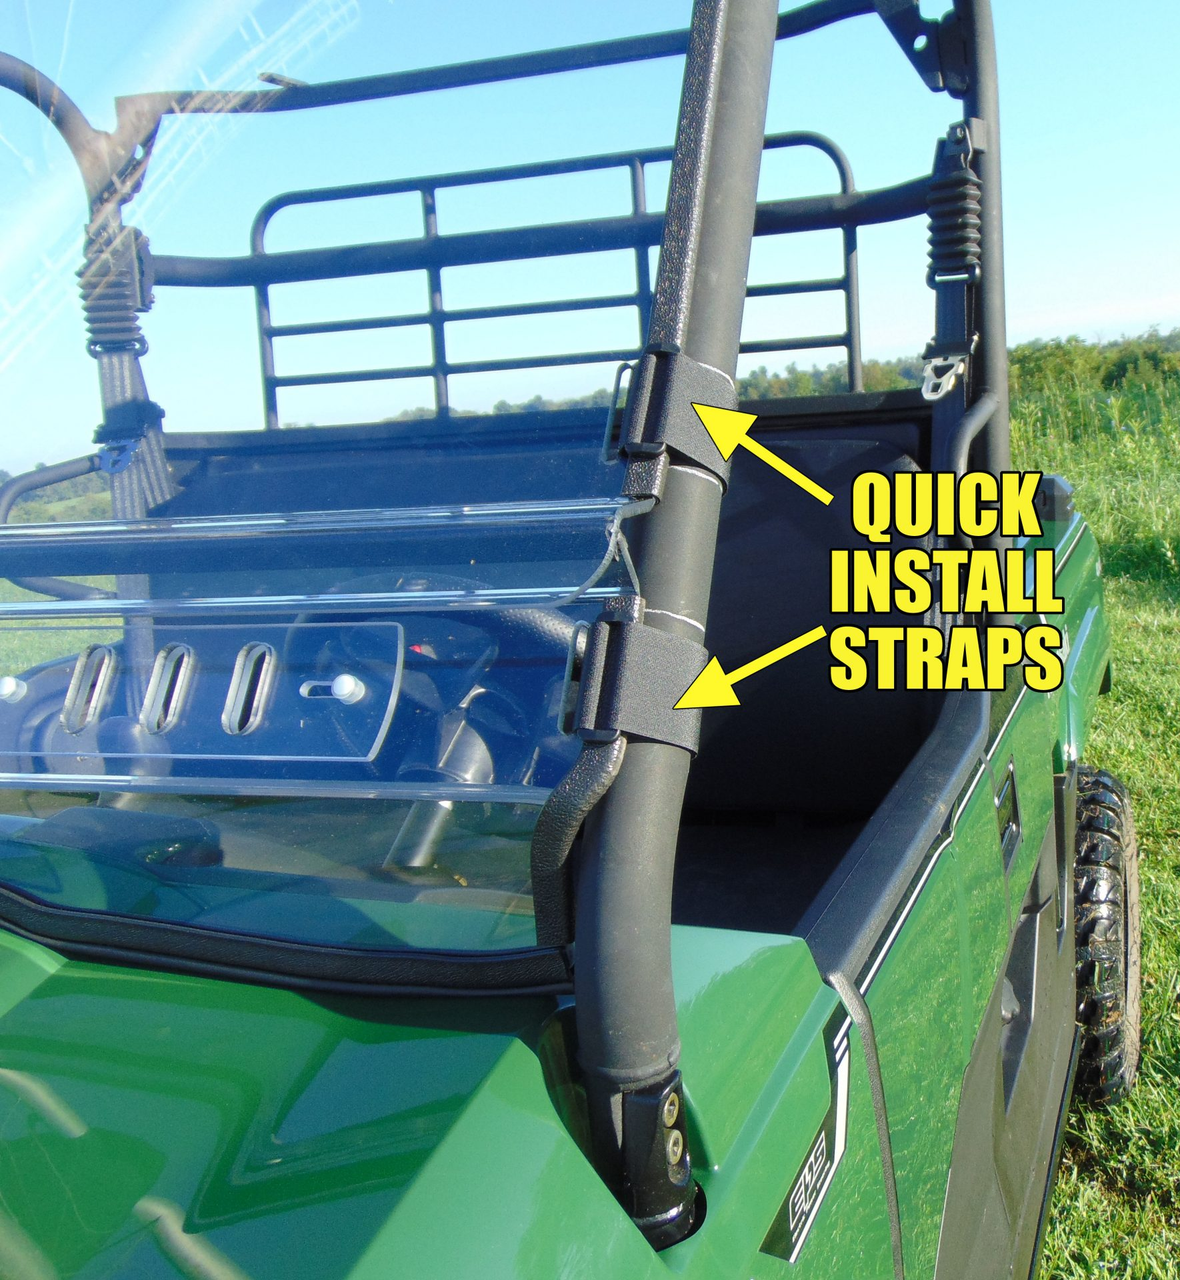 3 Star side x side Hisun Axis/HS 500/700 windshield quick install straps